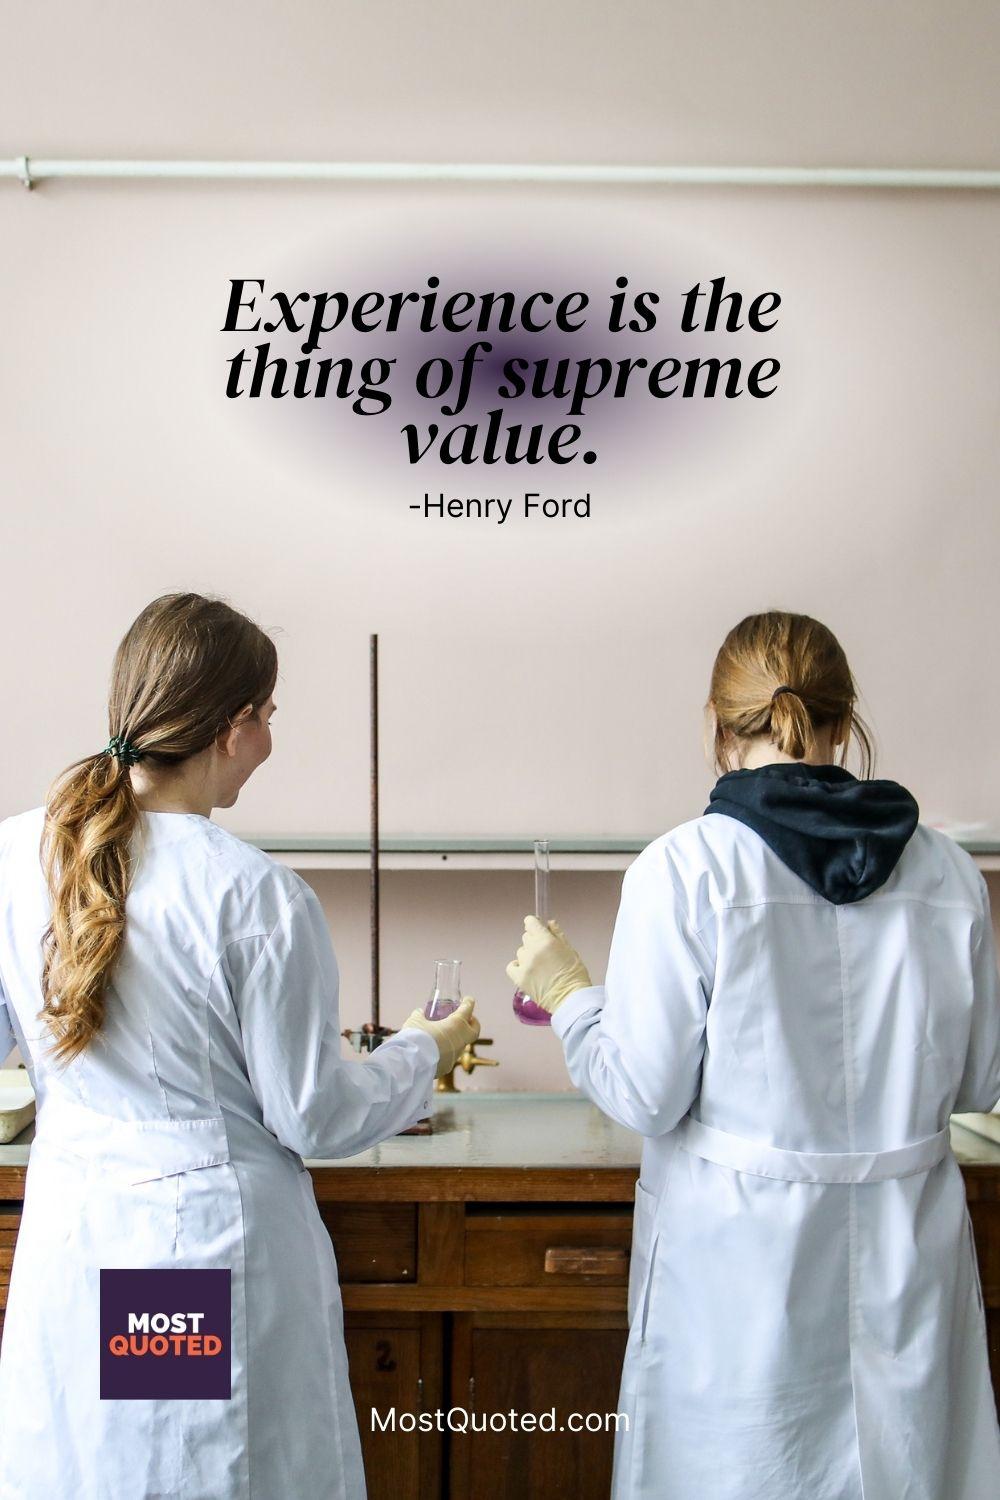 Experience is the thing of supreme value. - Henry Ford